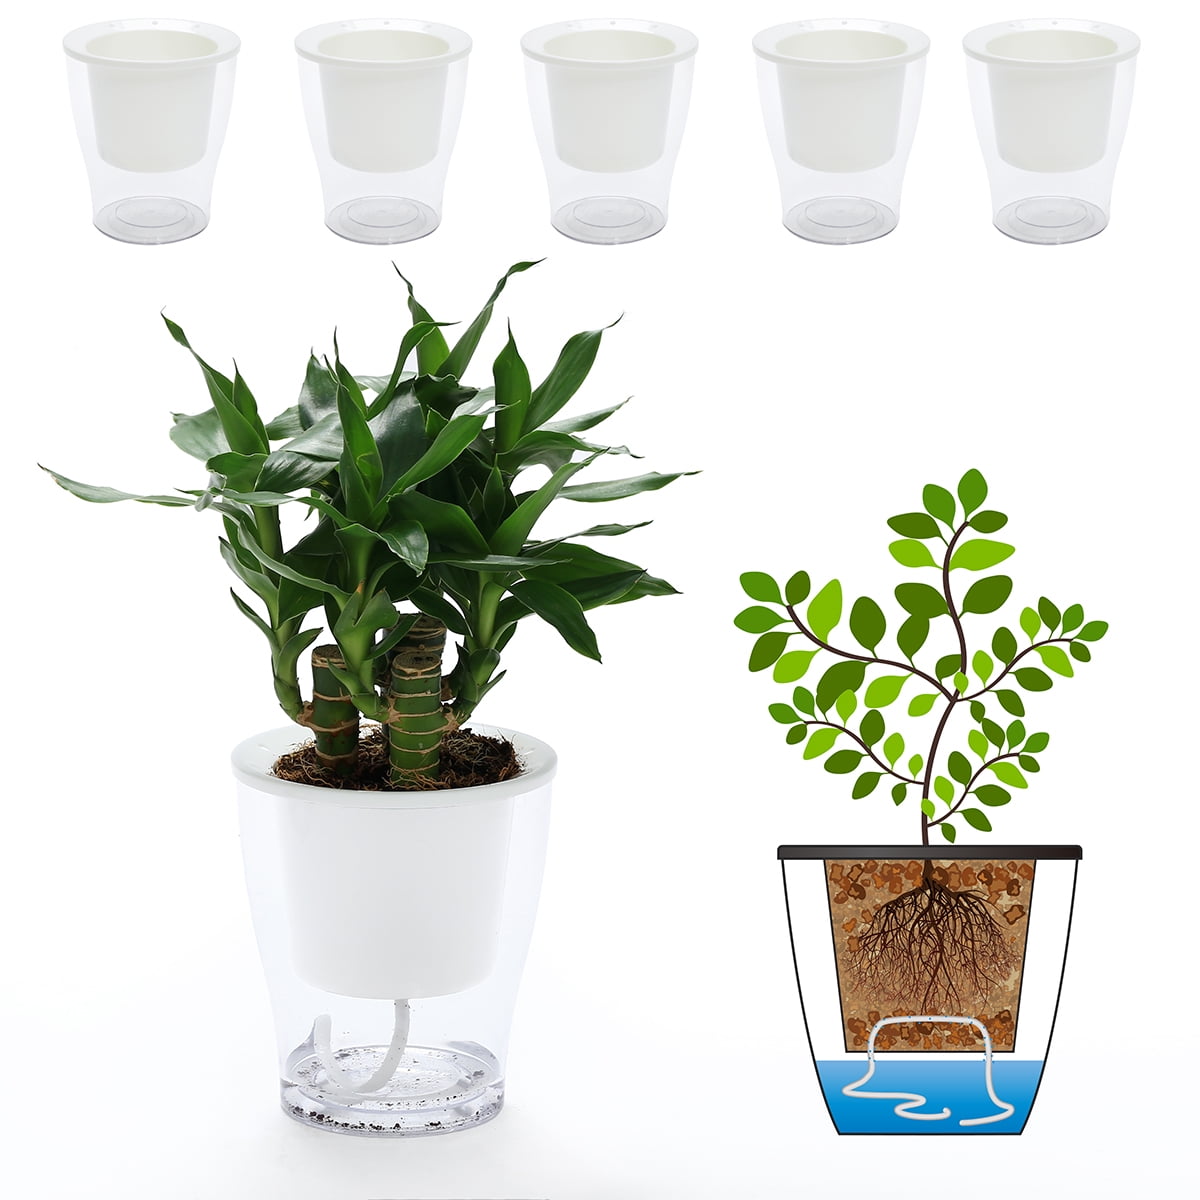 Details about   Self Watering Planter 6 inch African Violet Pots White Flower Plant Pot,Pack 6 